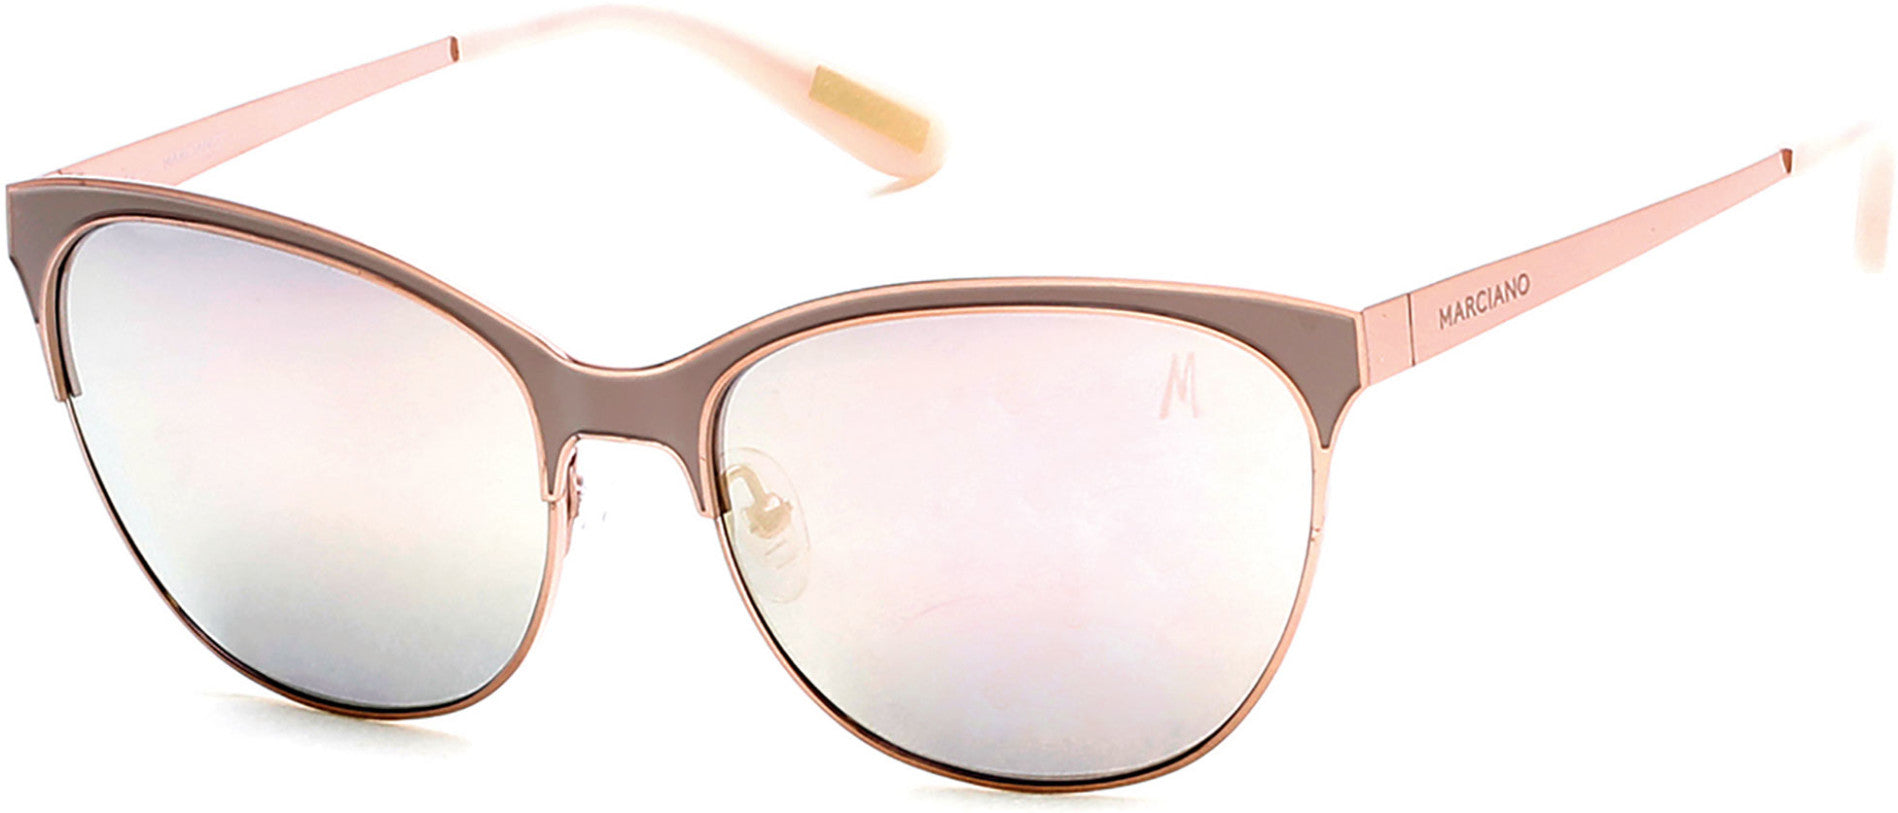 Guess By Marciano GM0750 Sunglasses 57G-57G - Shiny Beige / Brown Mirror